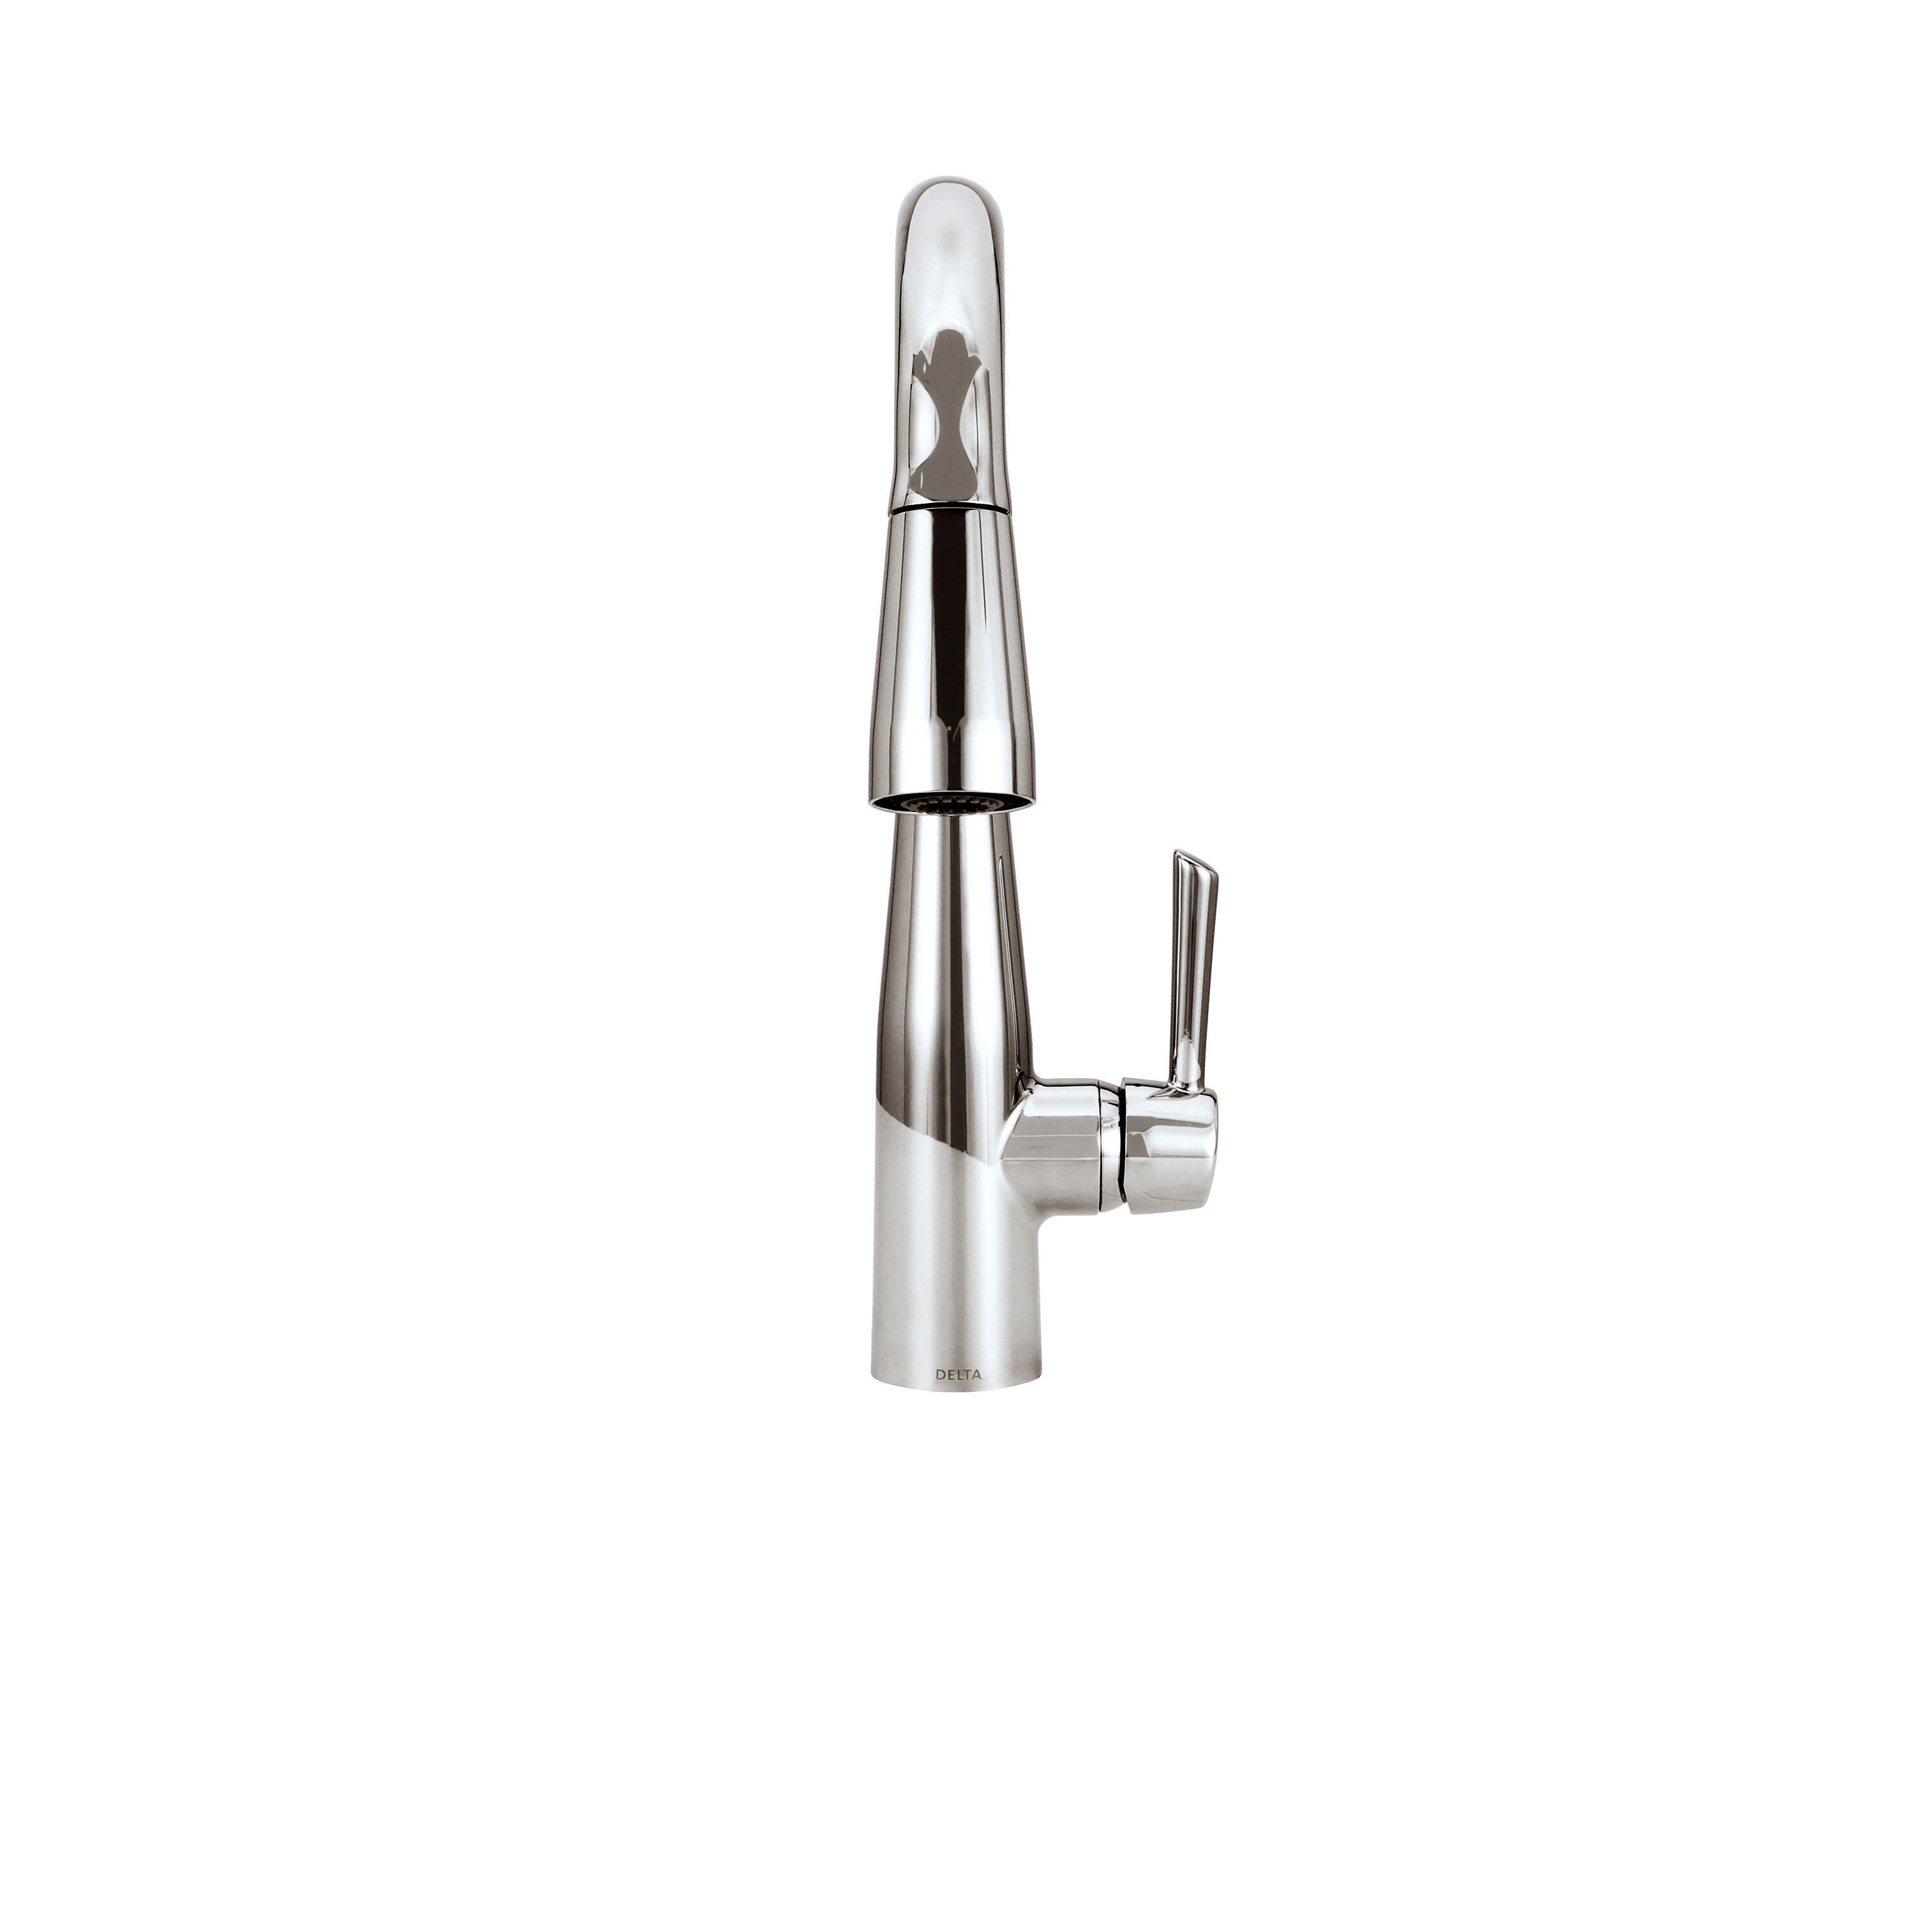 Grohe K7 Semi-Pro Single-Handle Pull-Out Kitchen Faucet 並行輸入品 キッチン